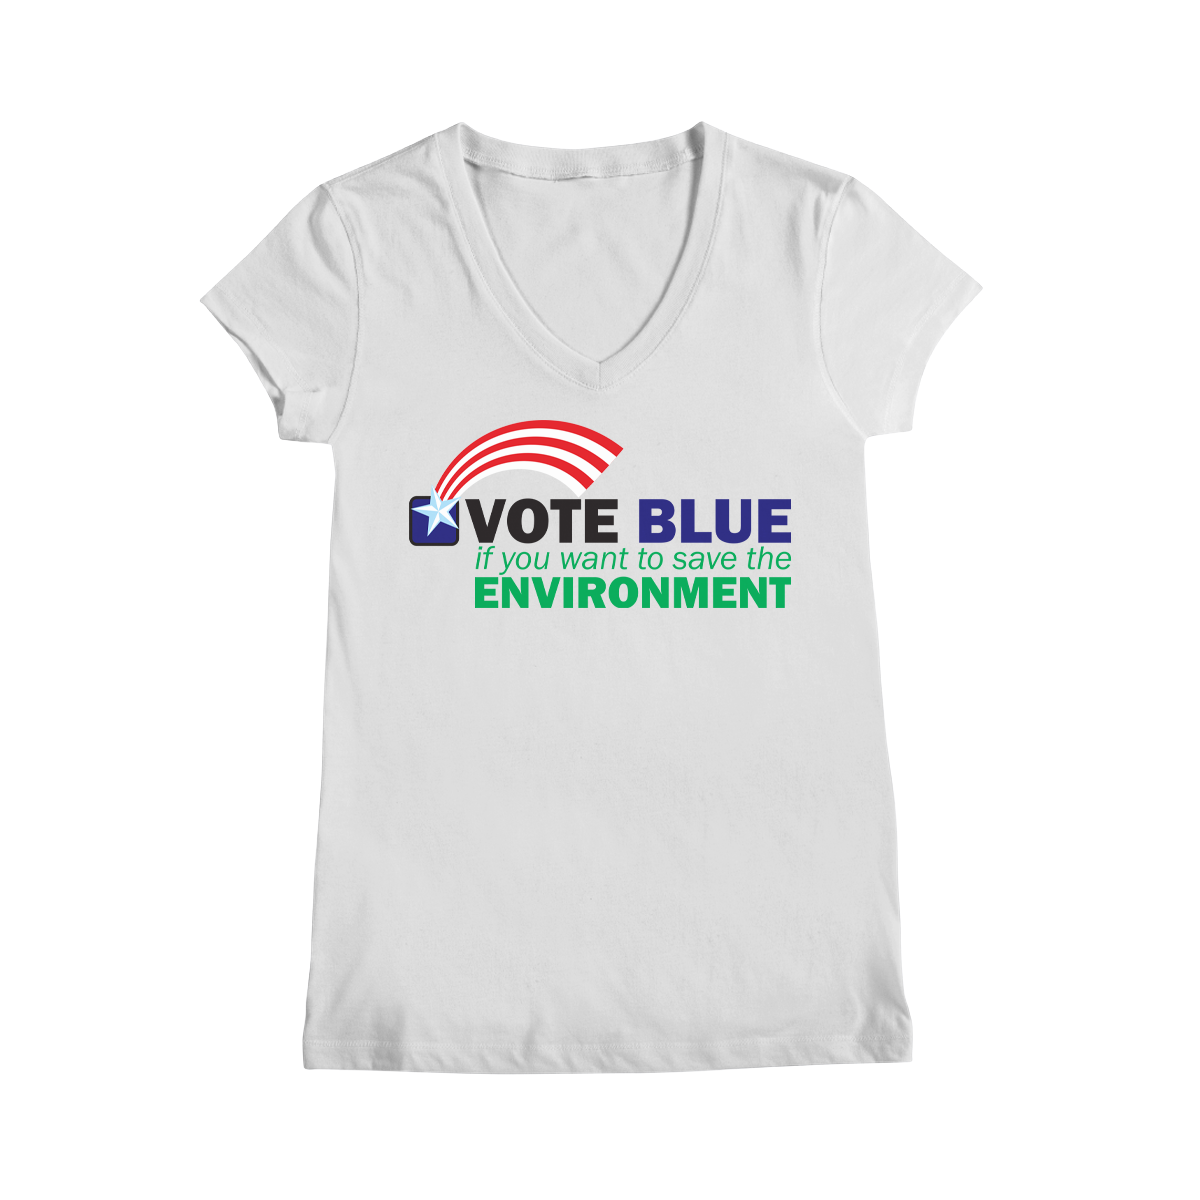 environment equal rights LGBTQ nasty Nasty Women Vote science Star Spangled usa vote voting rights